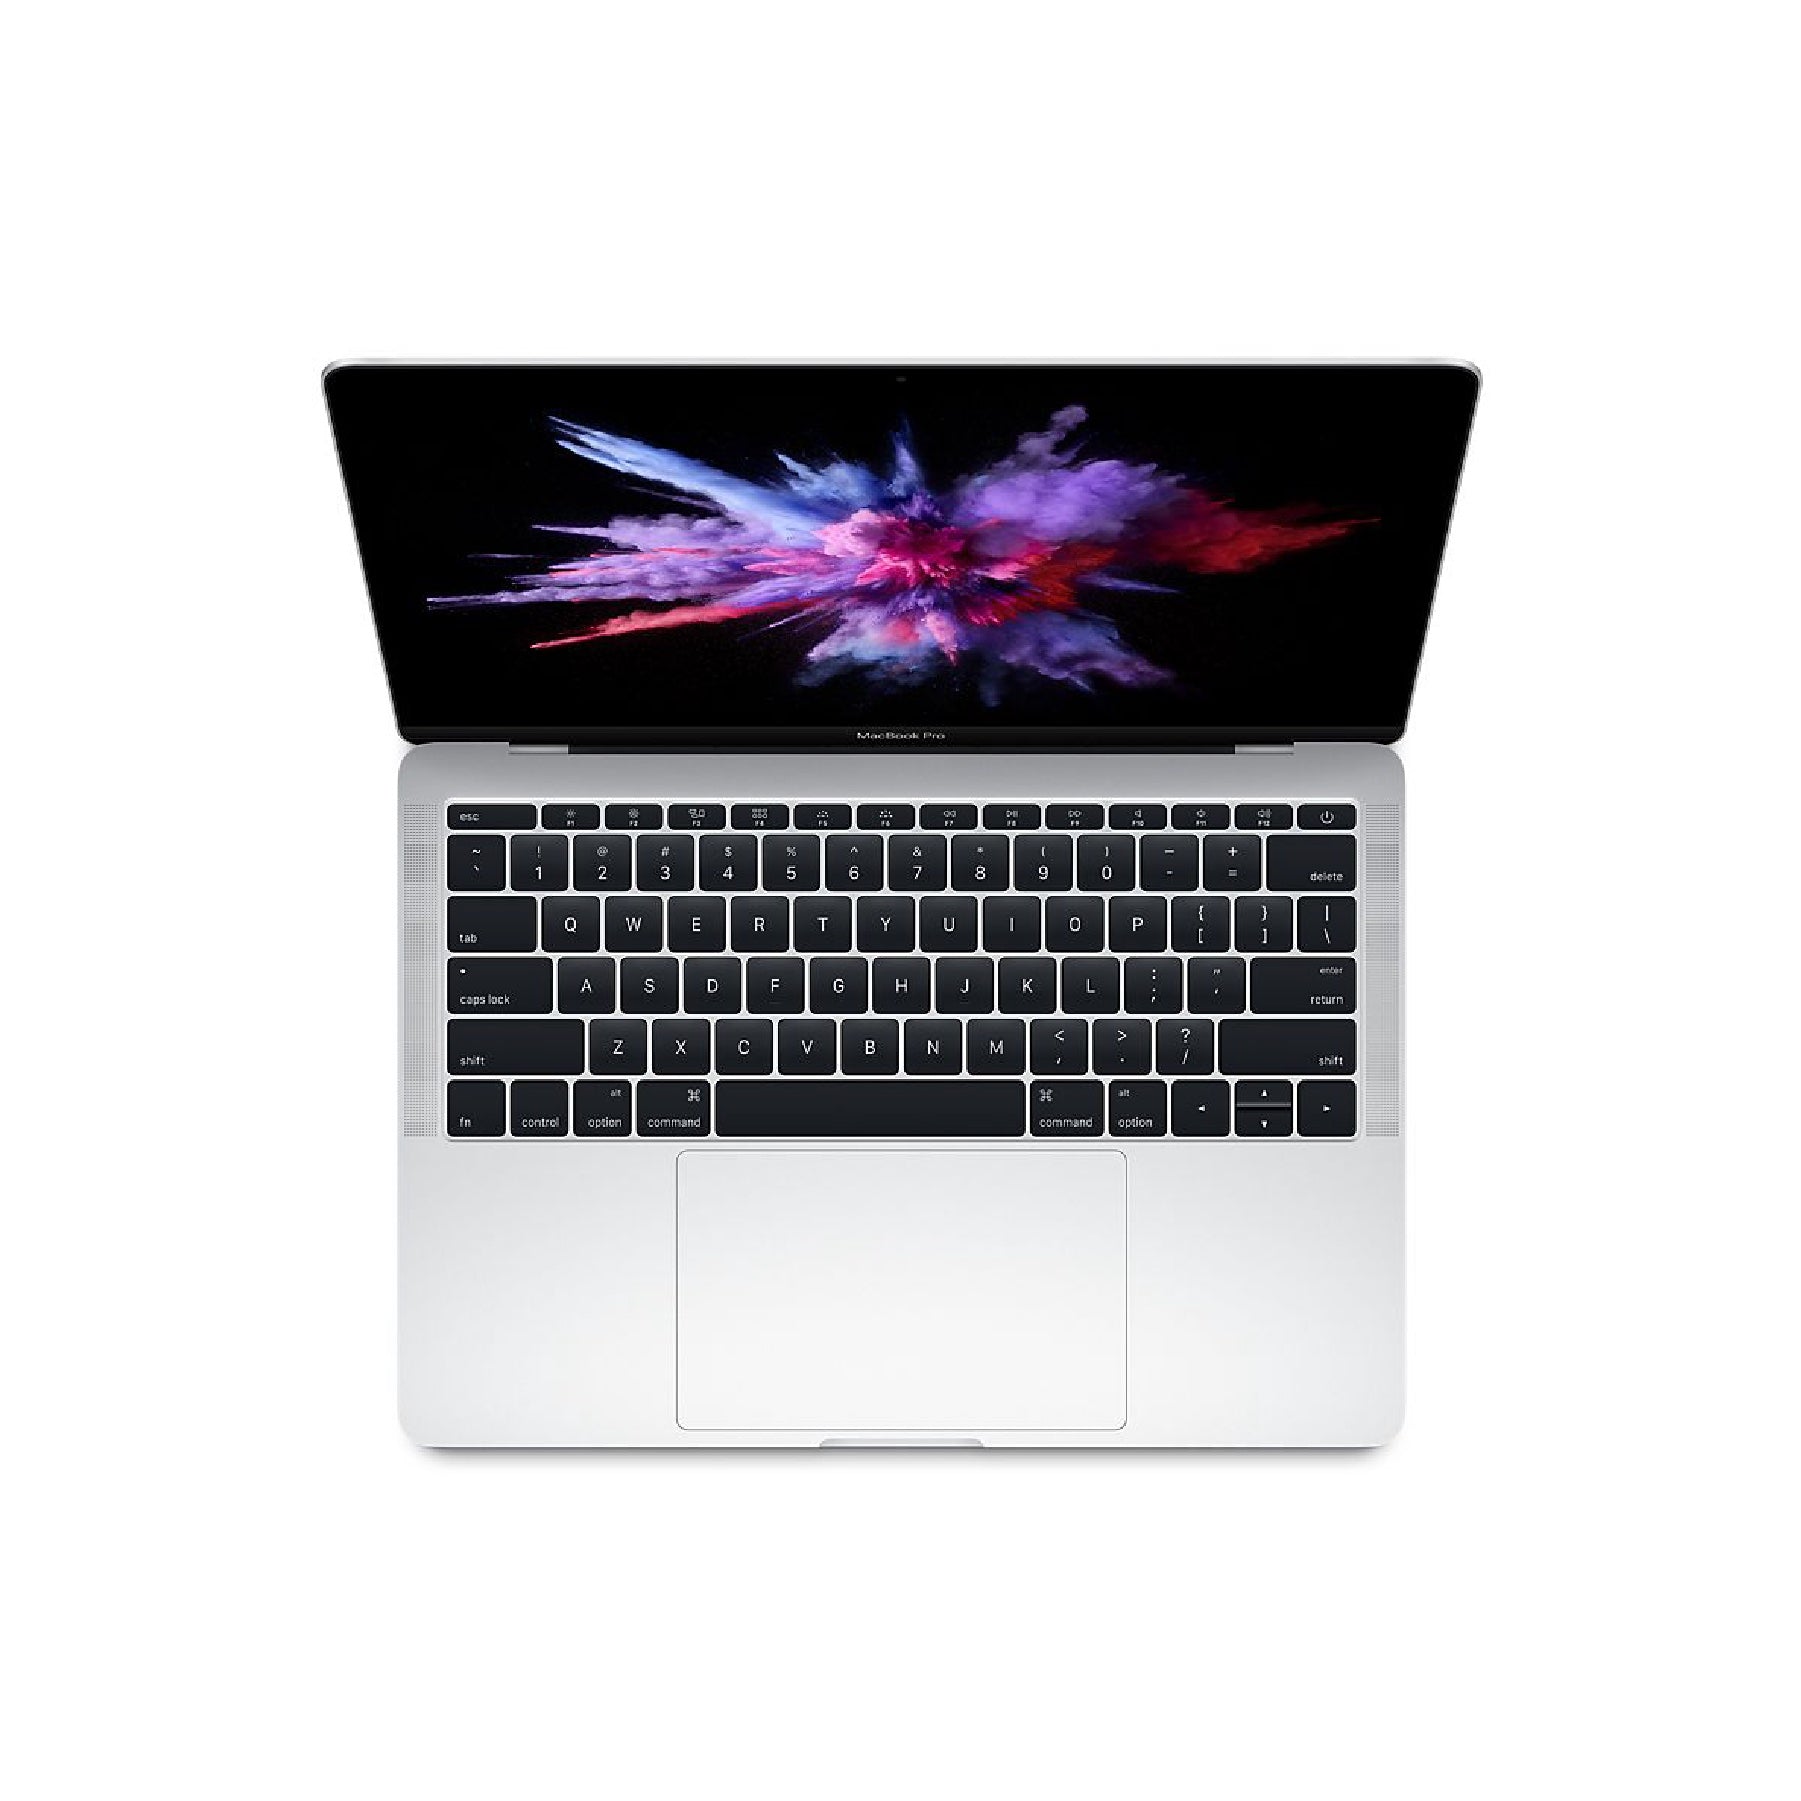 MacBook Pro (13-inch, 2017, Two Thunderbolt 3 ports) 2.3GHz, Intel Core i5  128GB - Silver (Better)